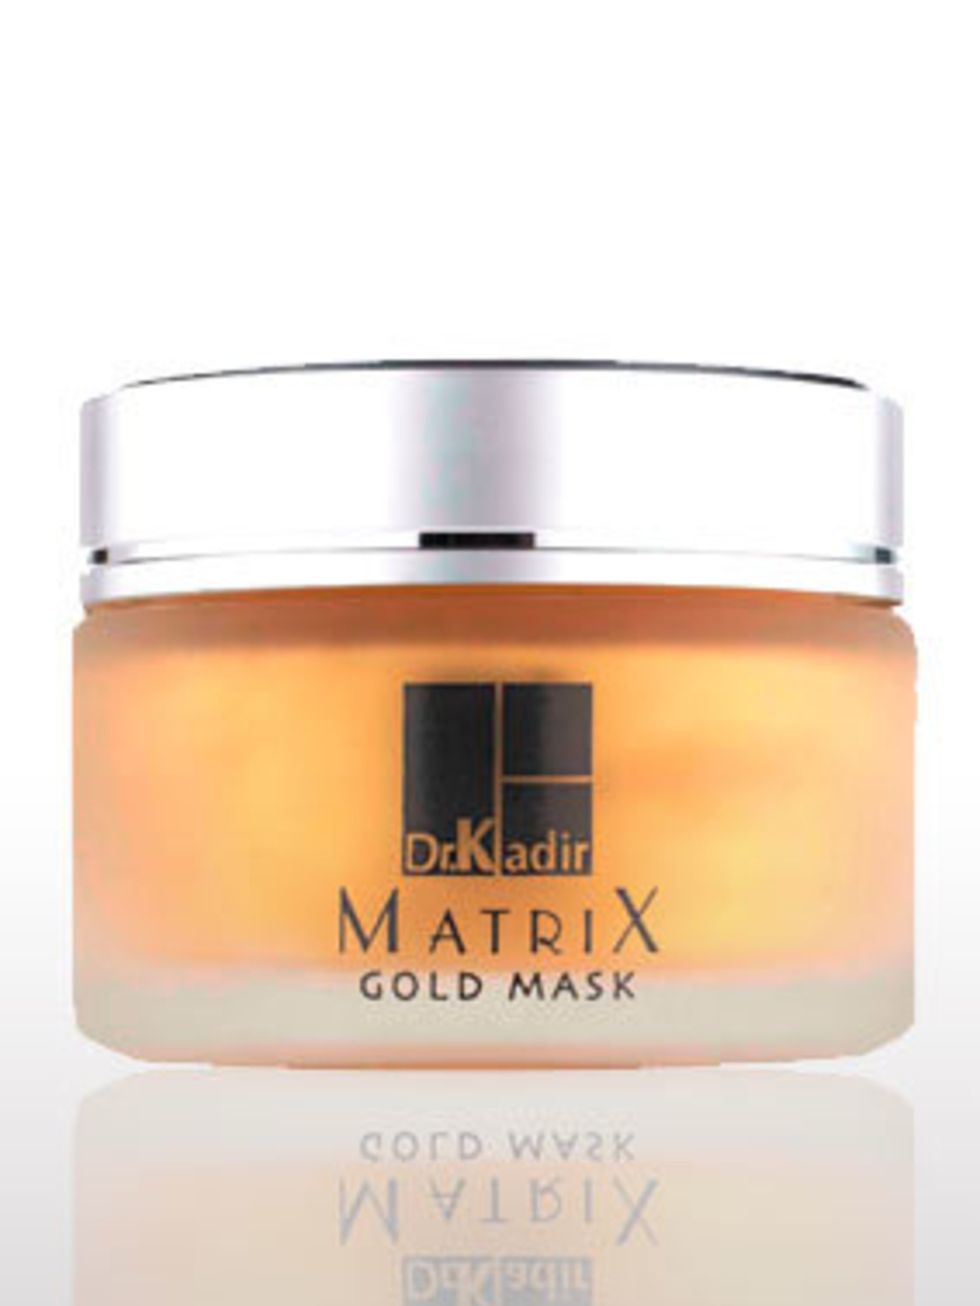 <p>Tel Aviv based dermatologist Dr Kadir is well known in the middle east, as well as having a cult following in New York (Jennifer Aniston and Madonna are fans). His Matrix Gold Mask, £110, brightens, lightens and hydrates skin in just 2-4 weeks thanks t